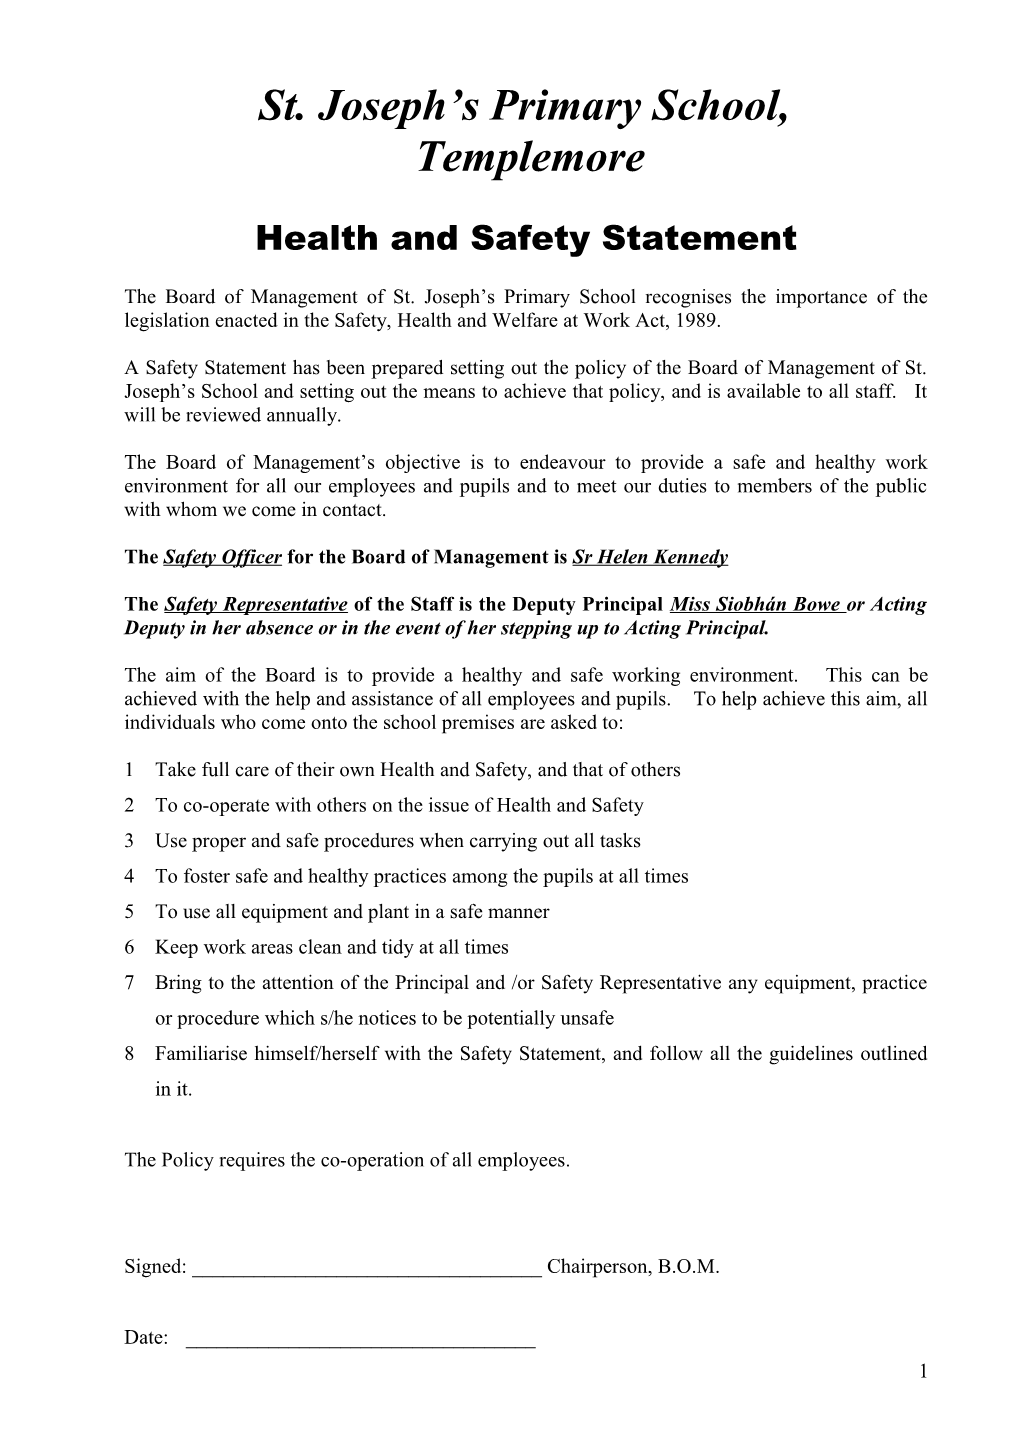 Health and Safety Statement